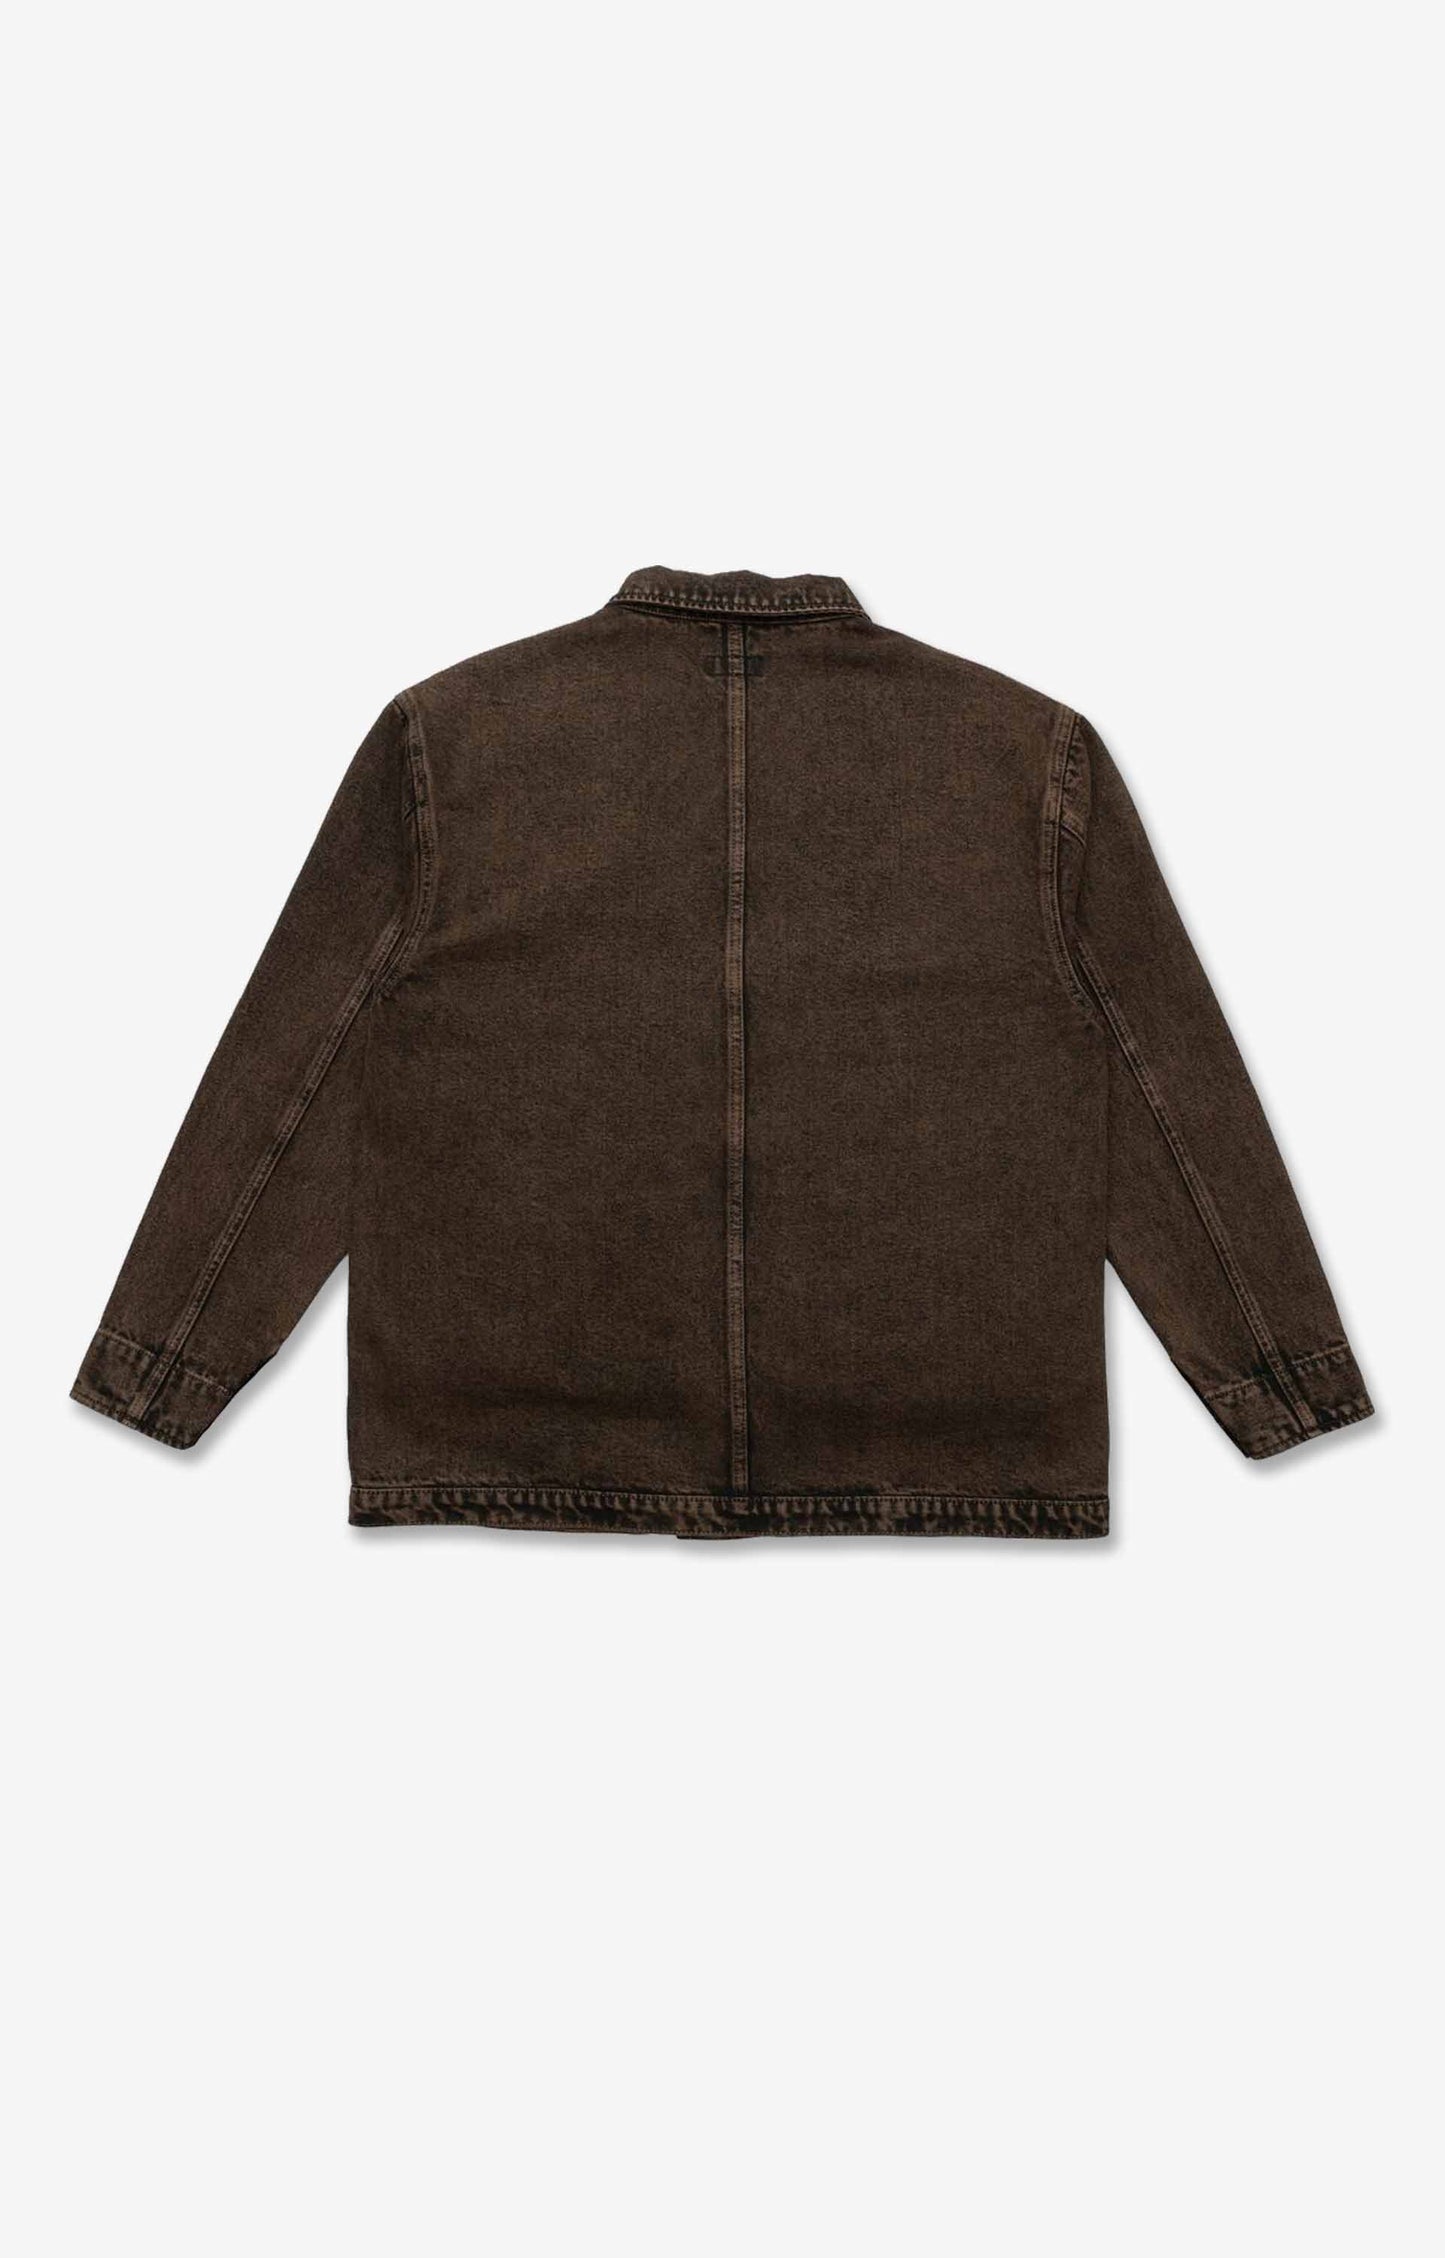 Pass~Port Workers Club Painters Jacket Outerwear, Brown